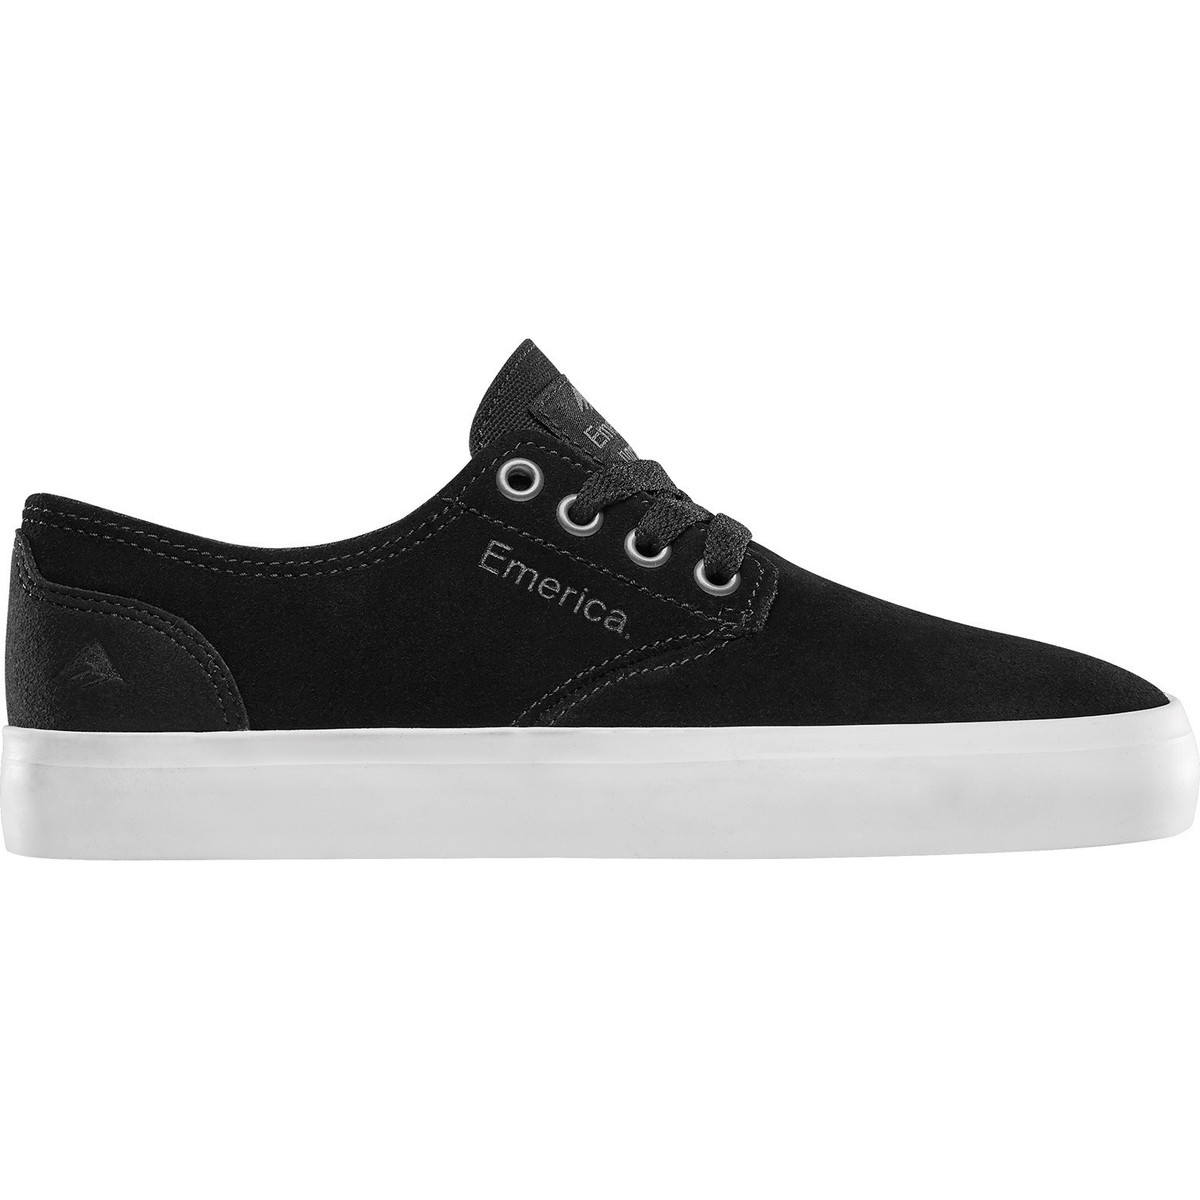 Emerica YOUTH THE ROMERO LACED BLACK WHITE GUM tMjkWvLH